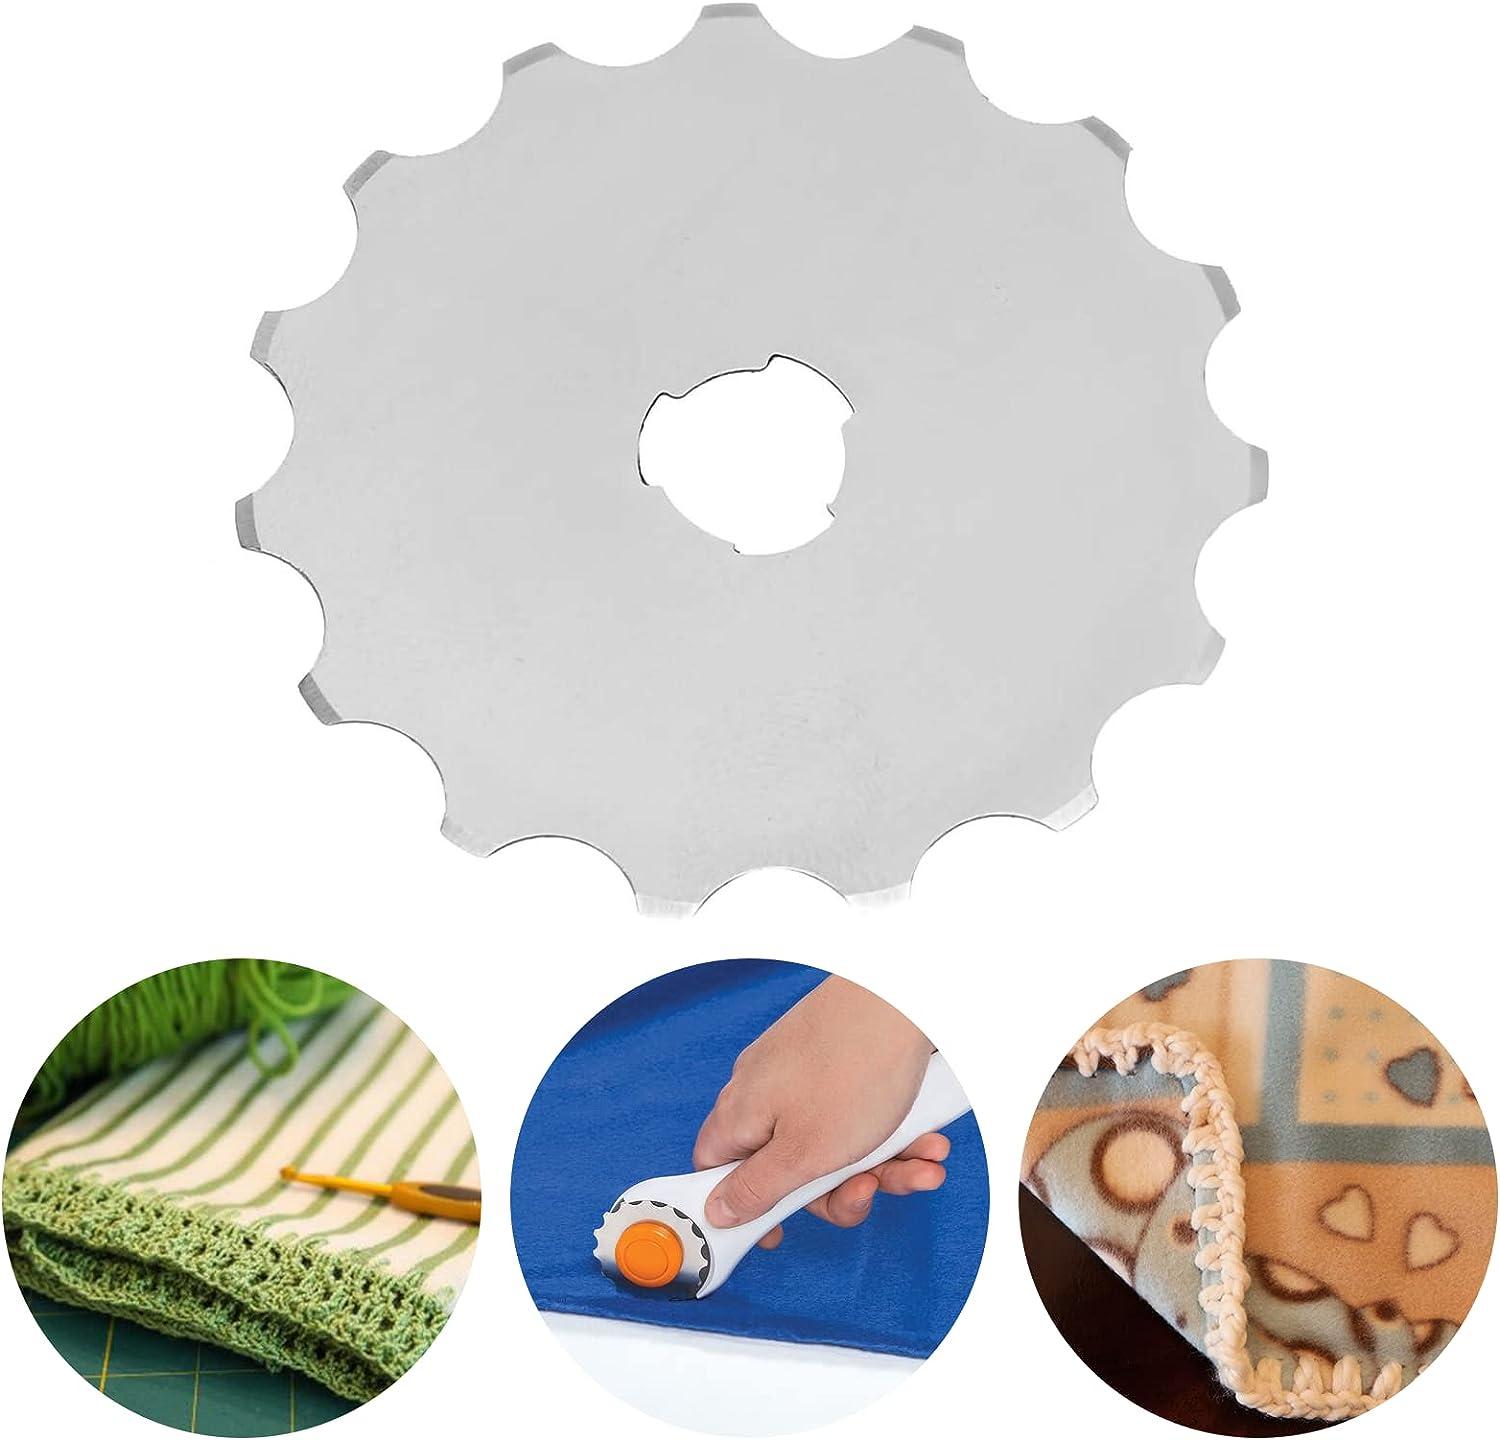 Watris Veiyi 45mm Rotary Cutter Blades, 5PCS Perforating Rotary Replacement  Blade, Wide Skip Blade Edging Tool for Crochet Edge Projects, Fleece